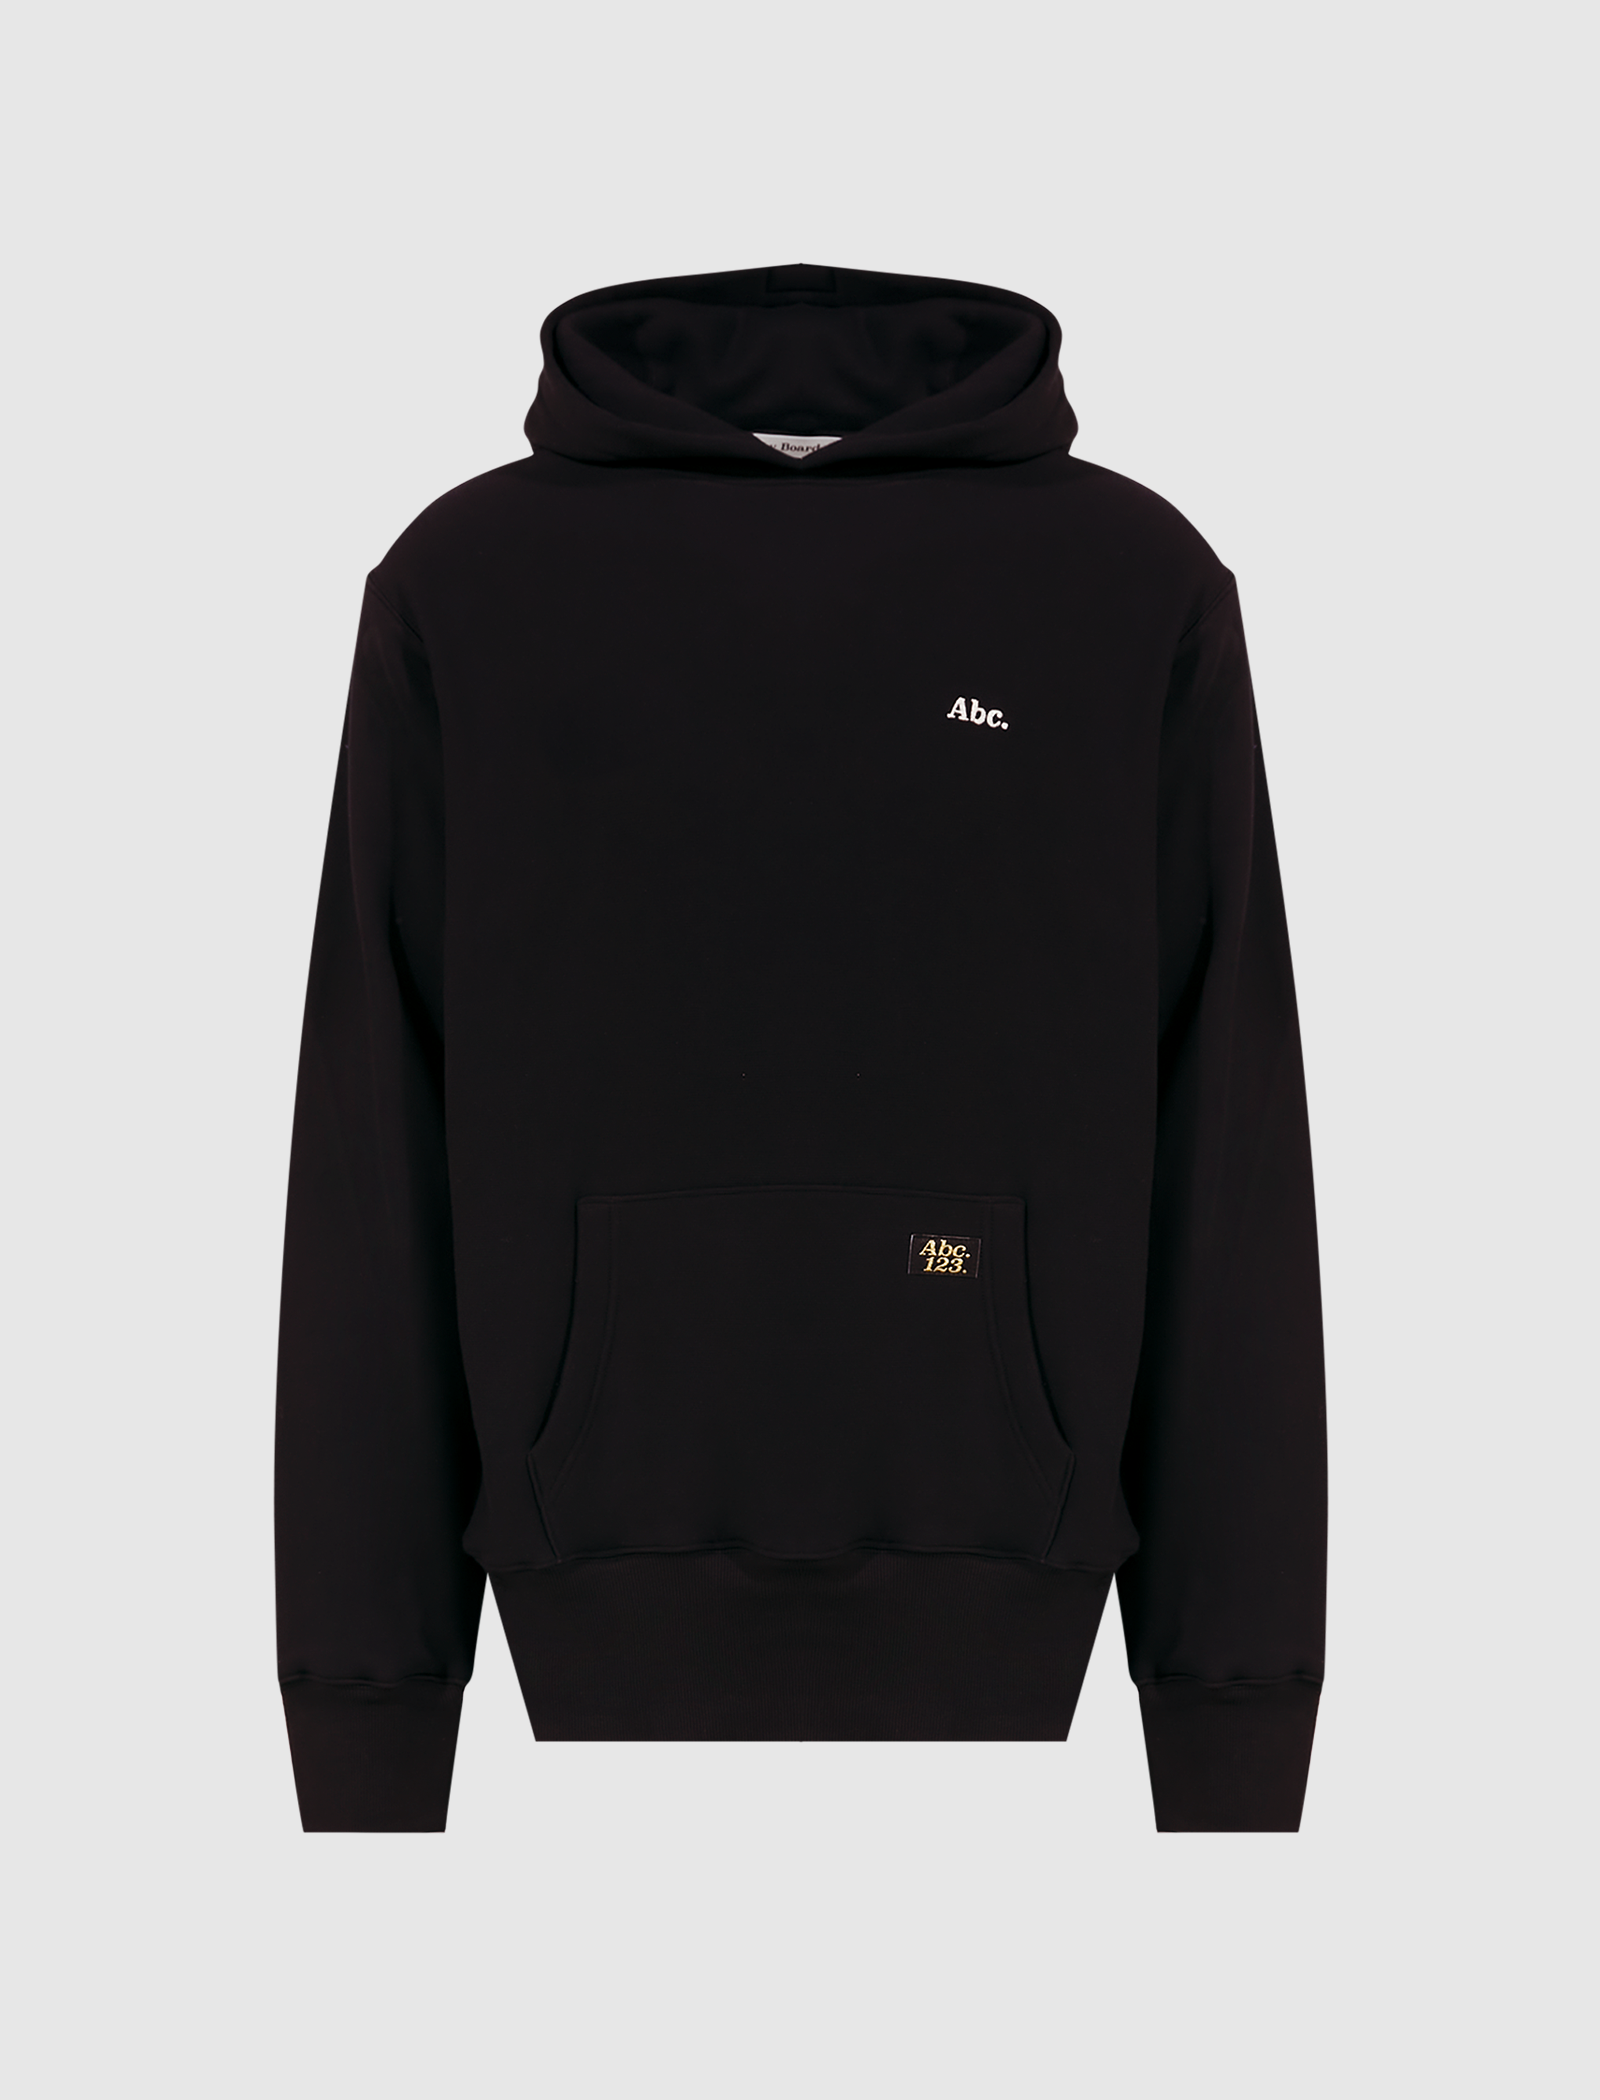 ADVISORY BOARD CRYSTALS PULLOVER HOODIE